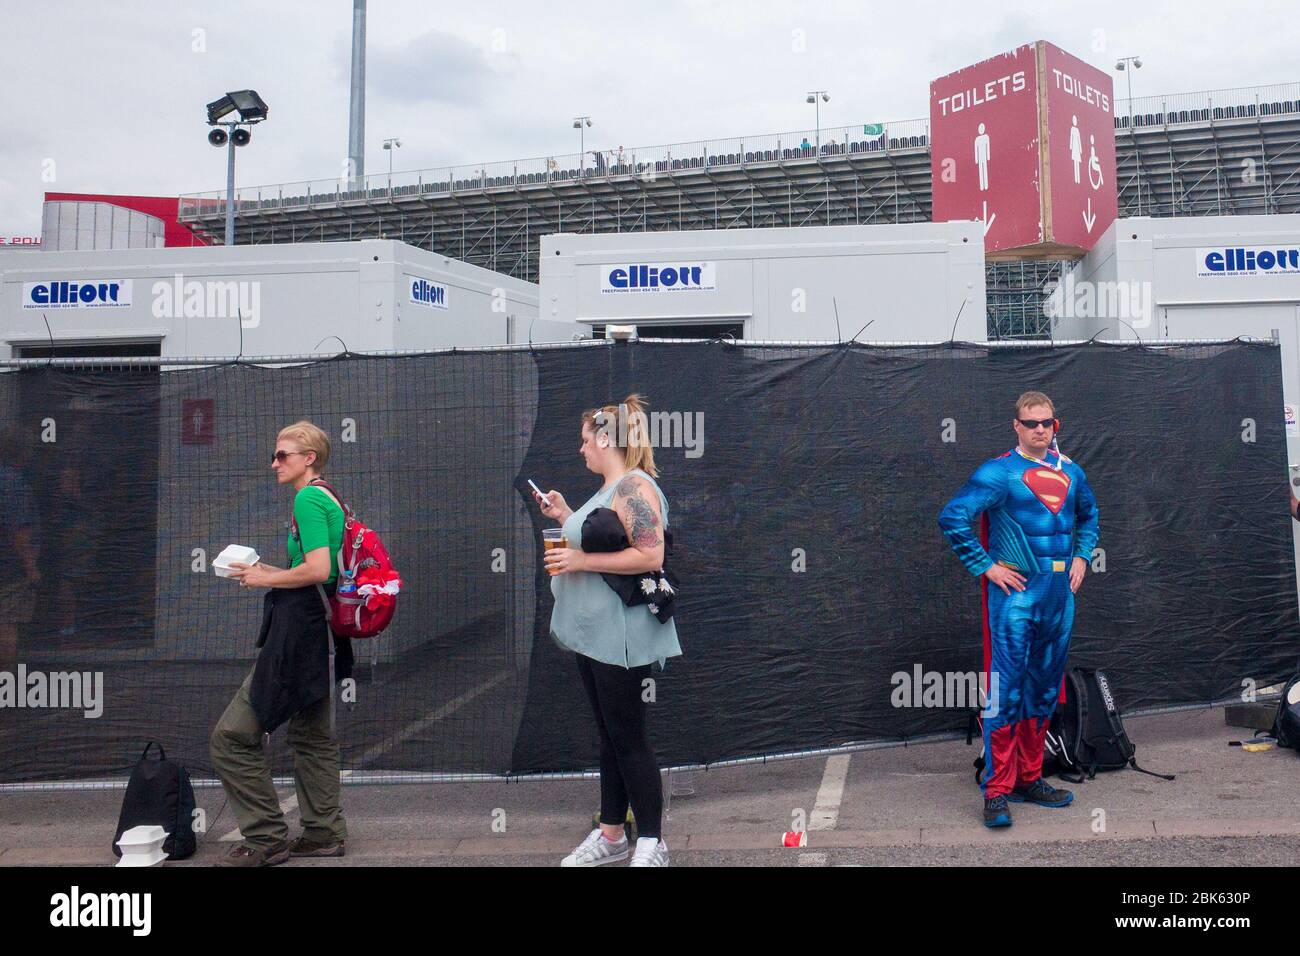 England cricket fan dressed as Superman waits outside the toilet during an England v Pakistan Test Match at Old Trafford cricket ground, Lancashire. Stock Photo